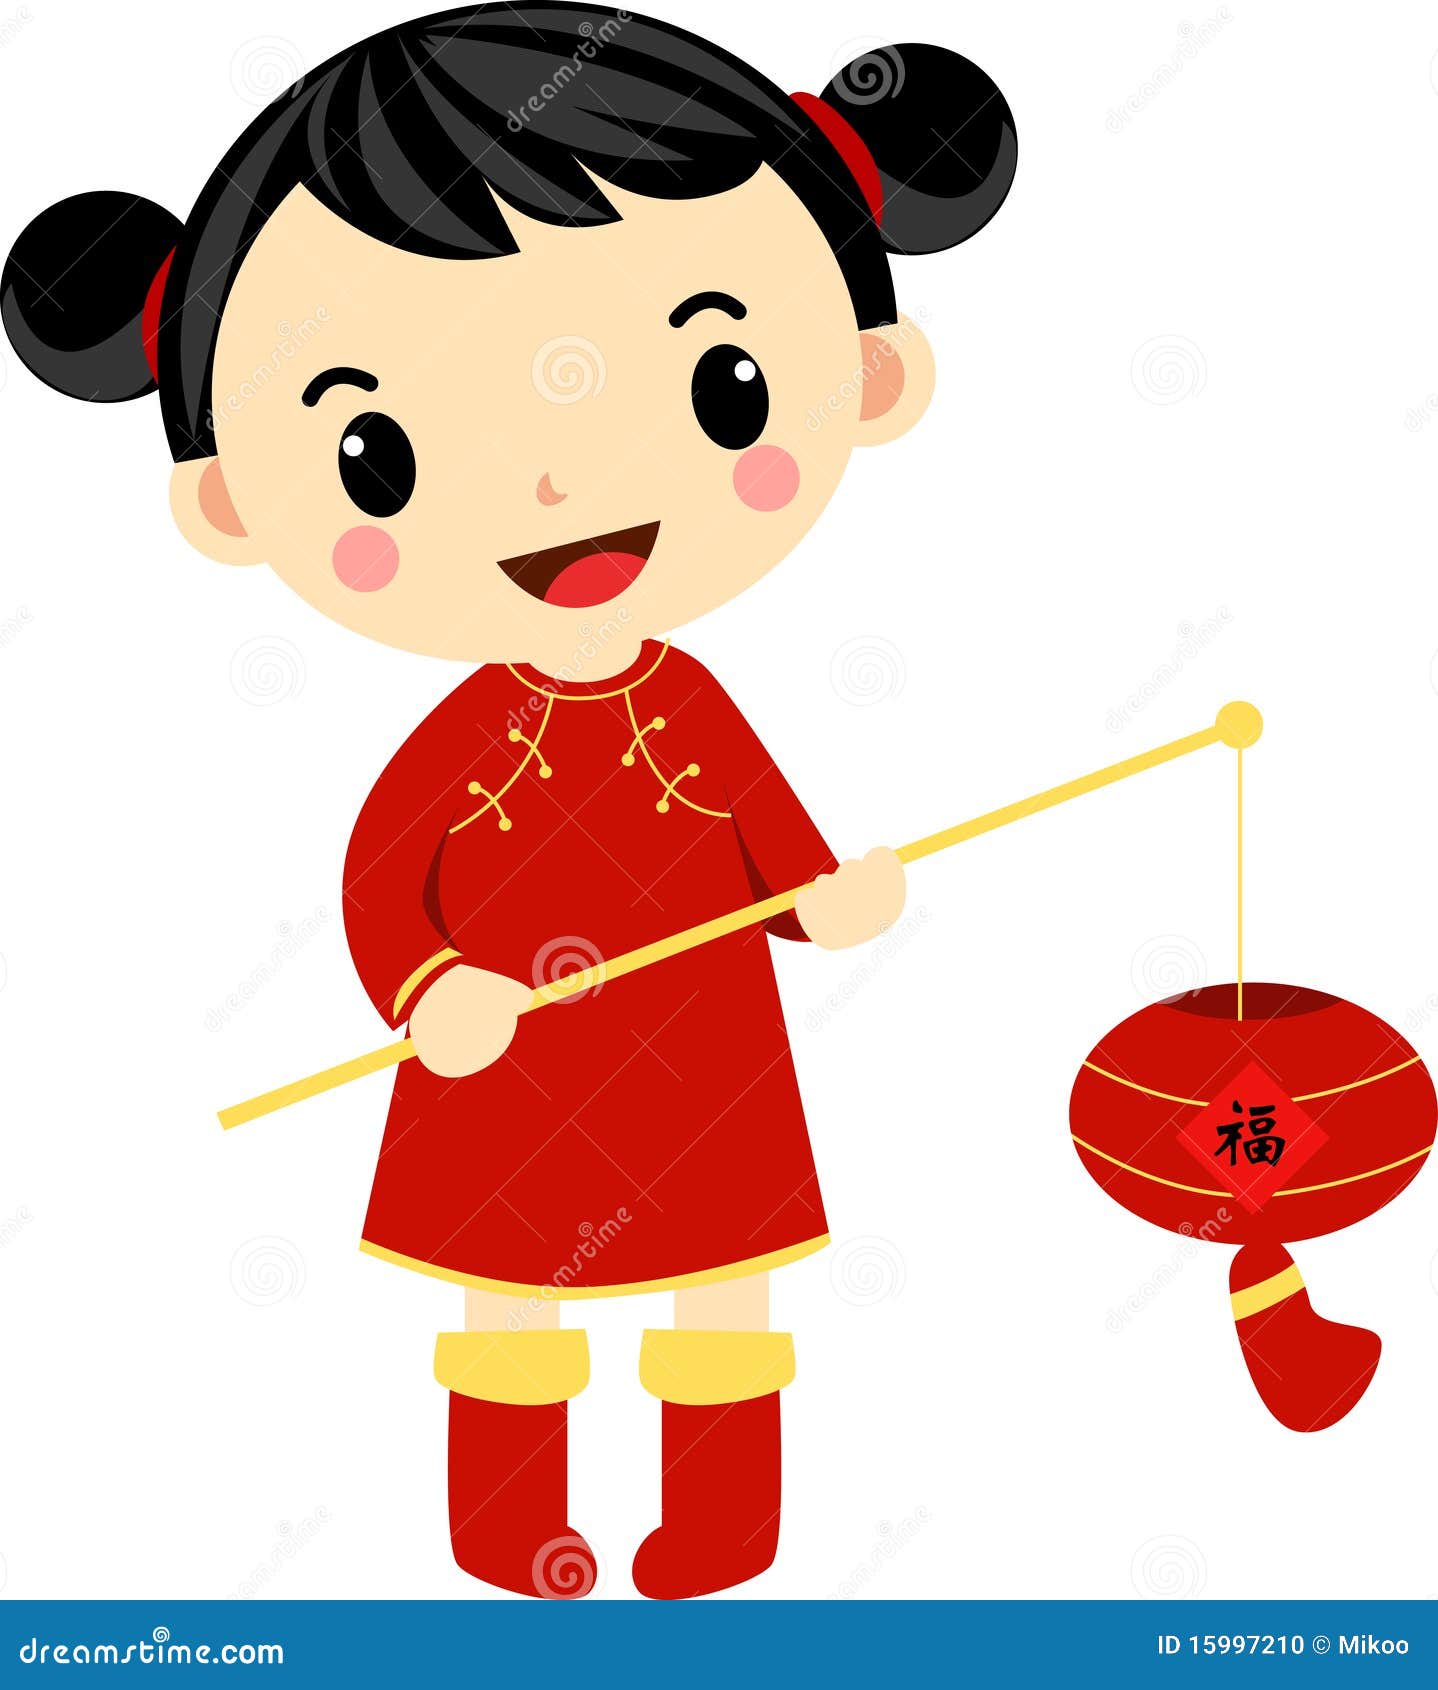 clipart chinese girl - photo #8